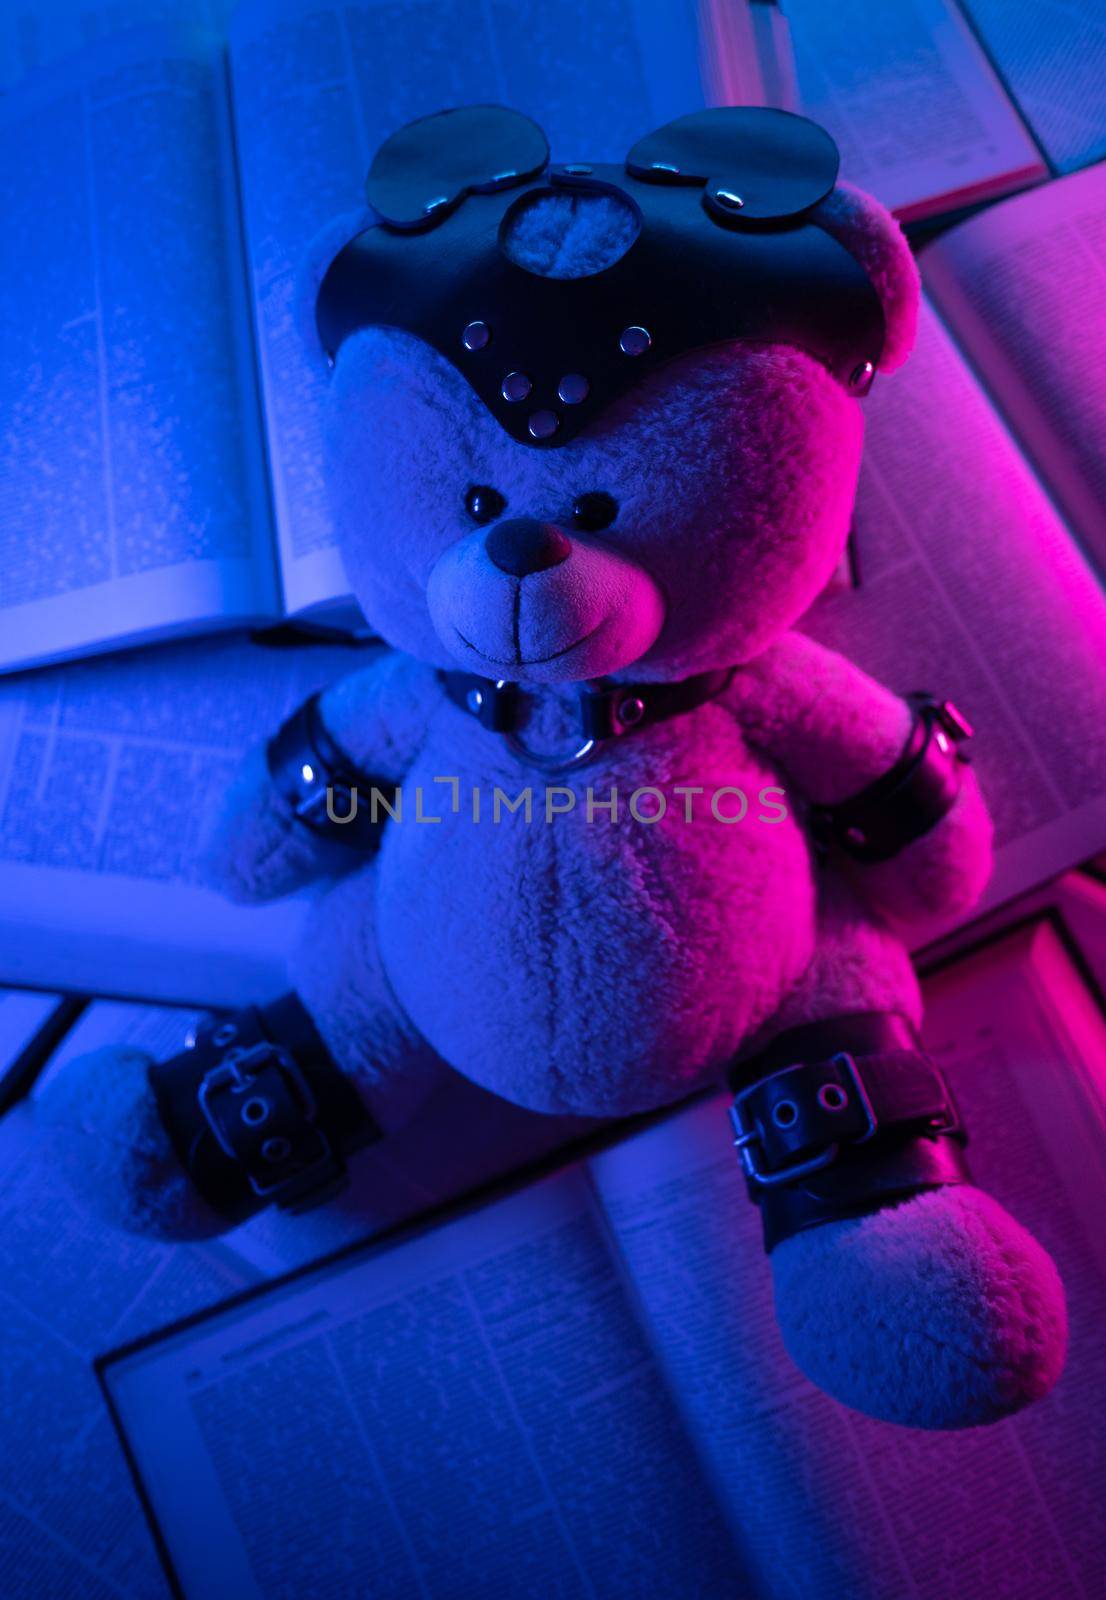 accessory for bdsm games on a teddy bear among open books